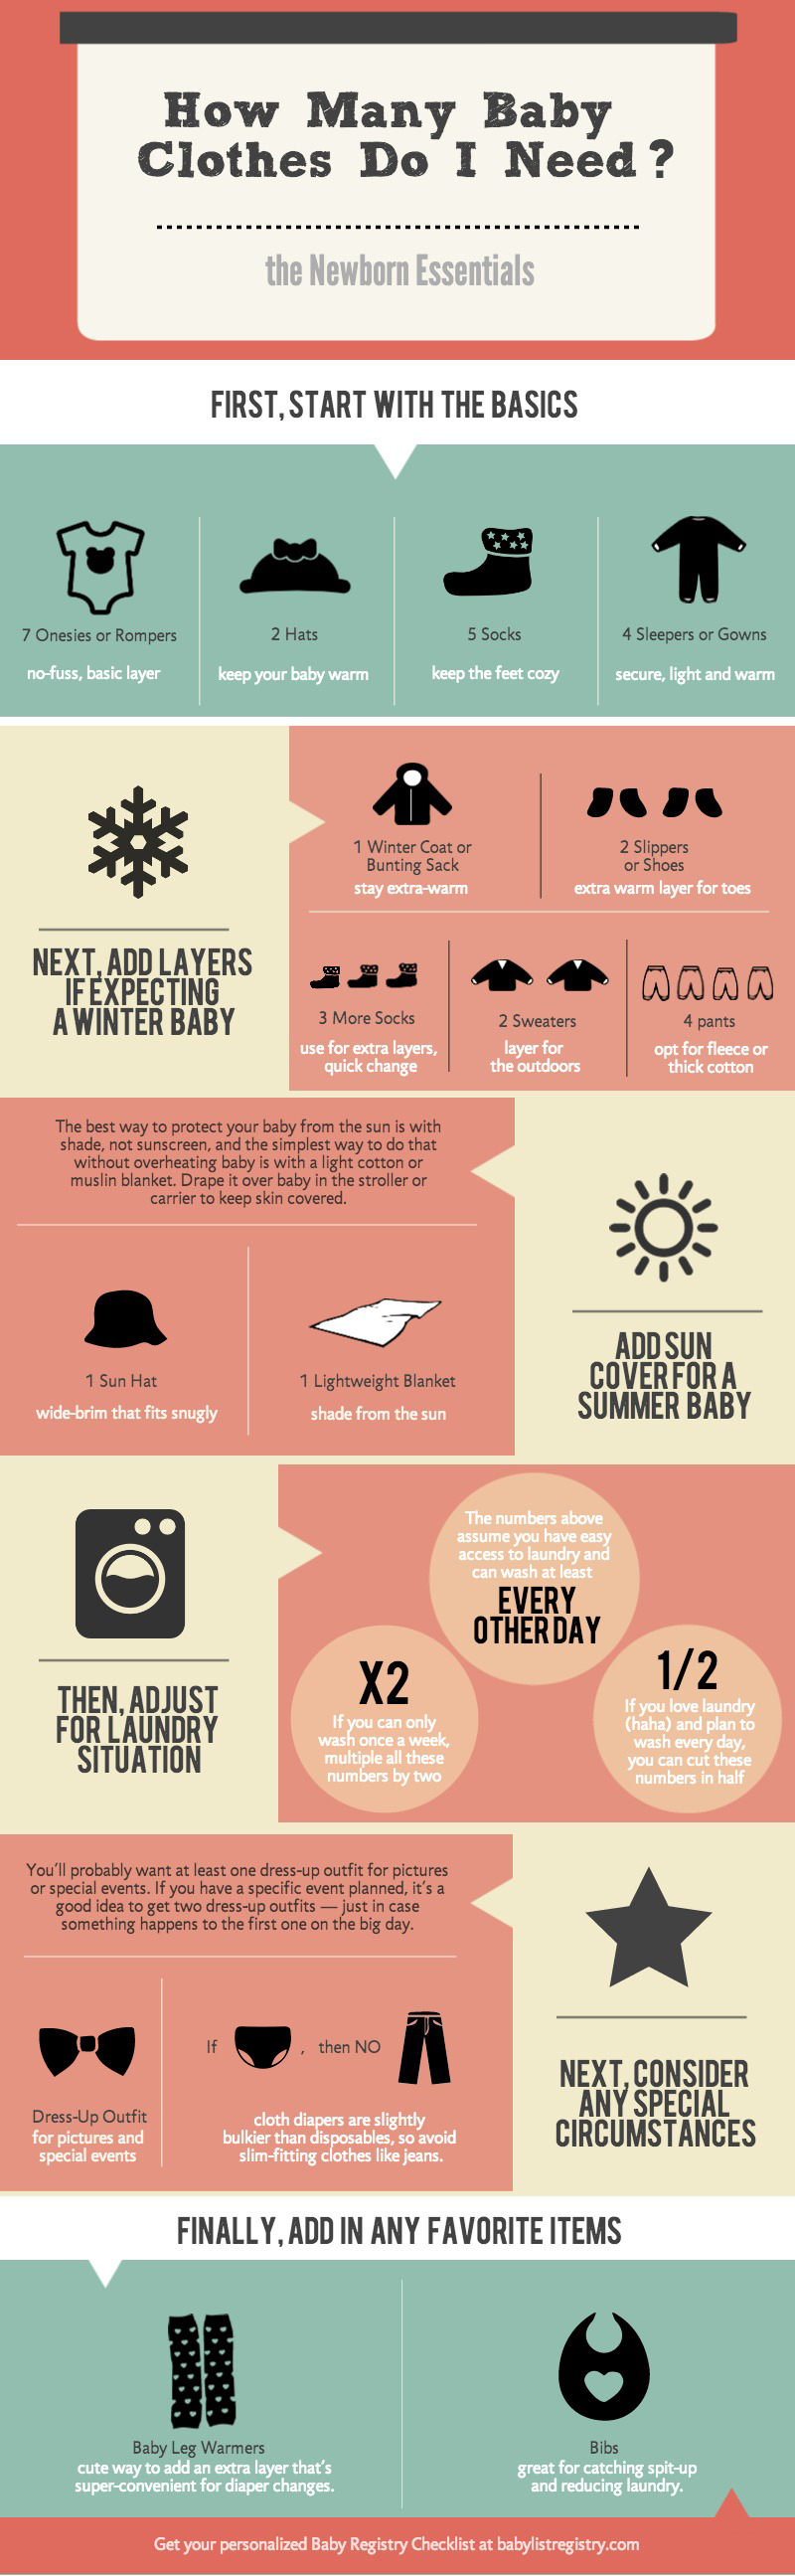 babylist-baby-clothes-infographic_uxcd59.jpg